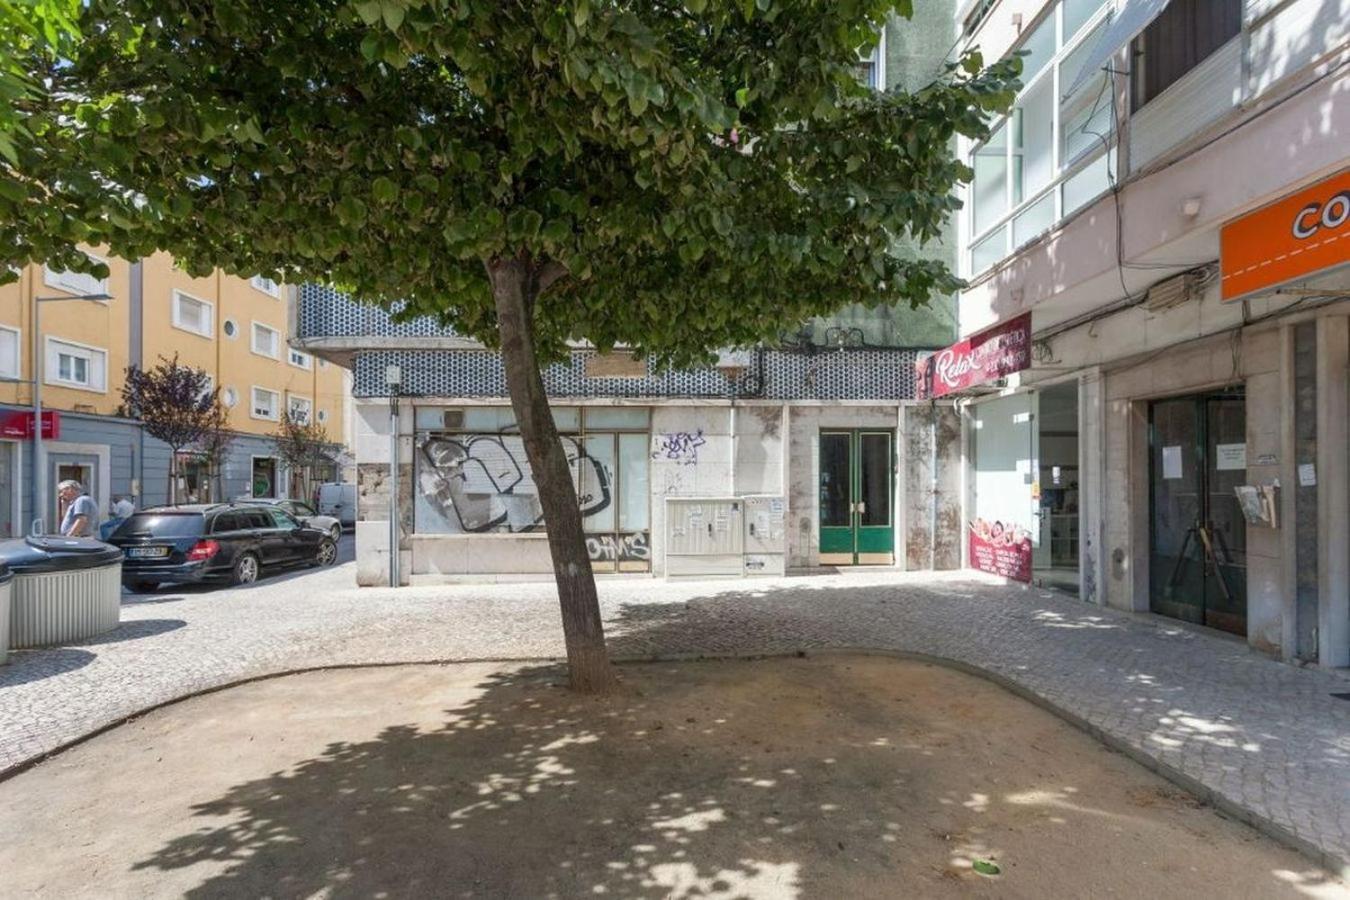 Be Local - Apartment With 2 Bedrooms In Moscavide - Lisboa 外观 照片